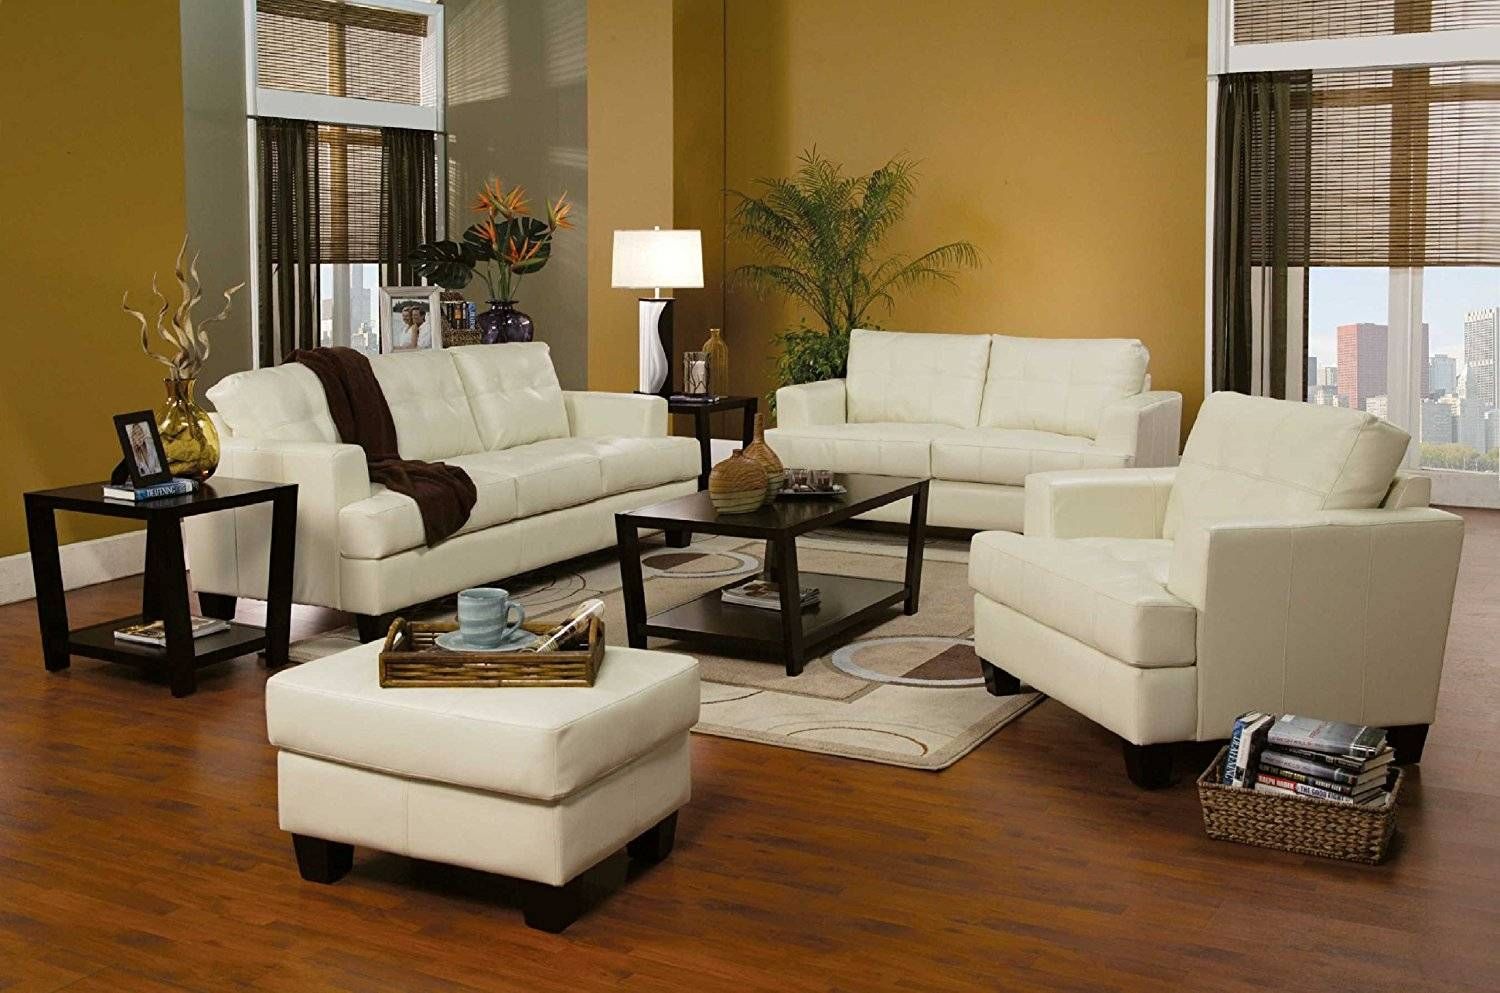 Living Room: Sofa Sleepers Living Room With Brown Sofa Decor And Throughout Brown Sofa Decors (View 7 of 15)